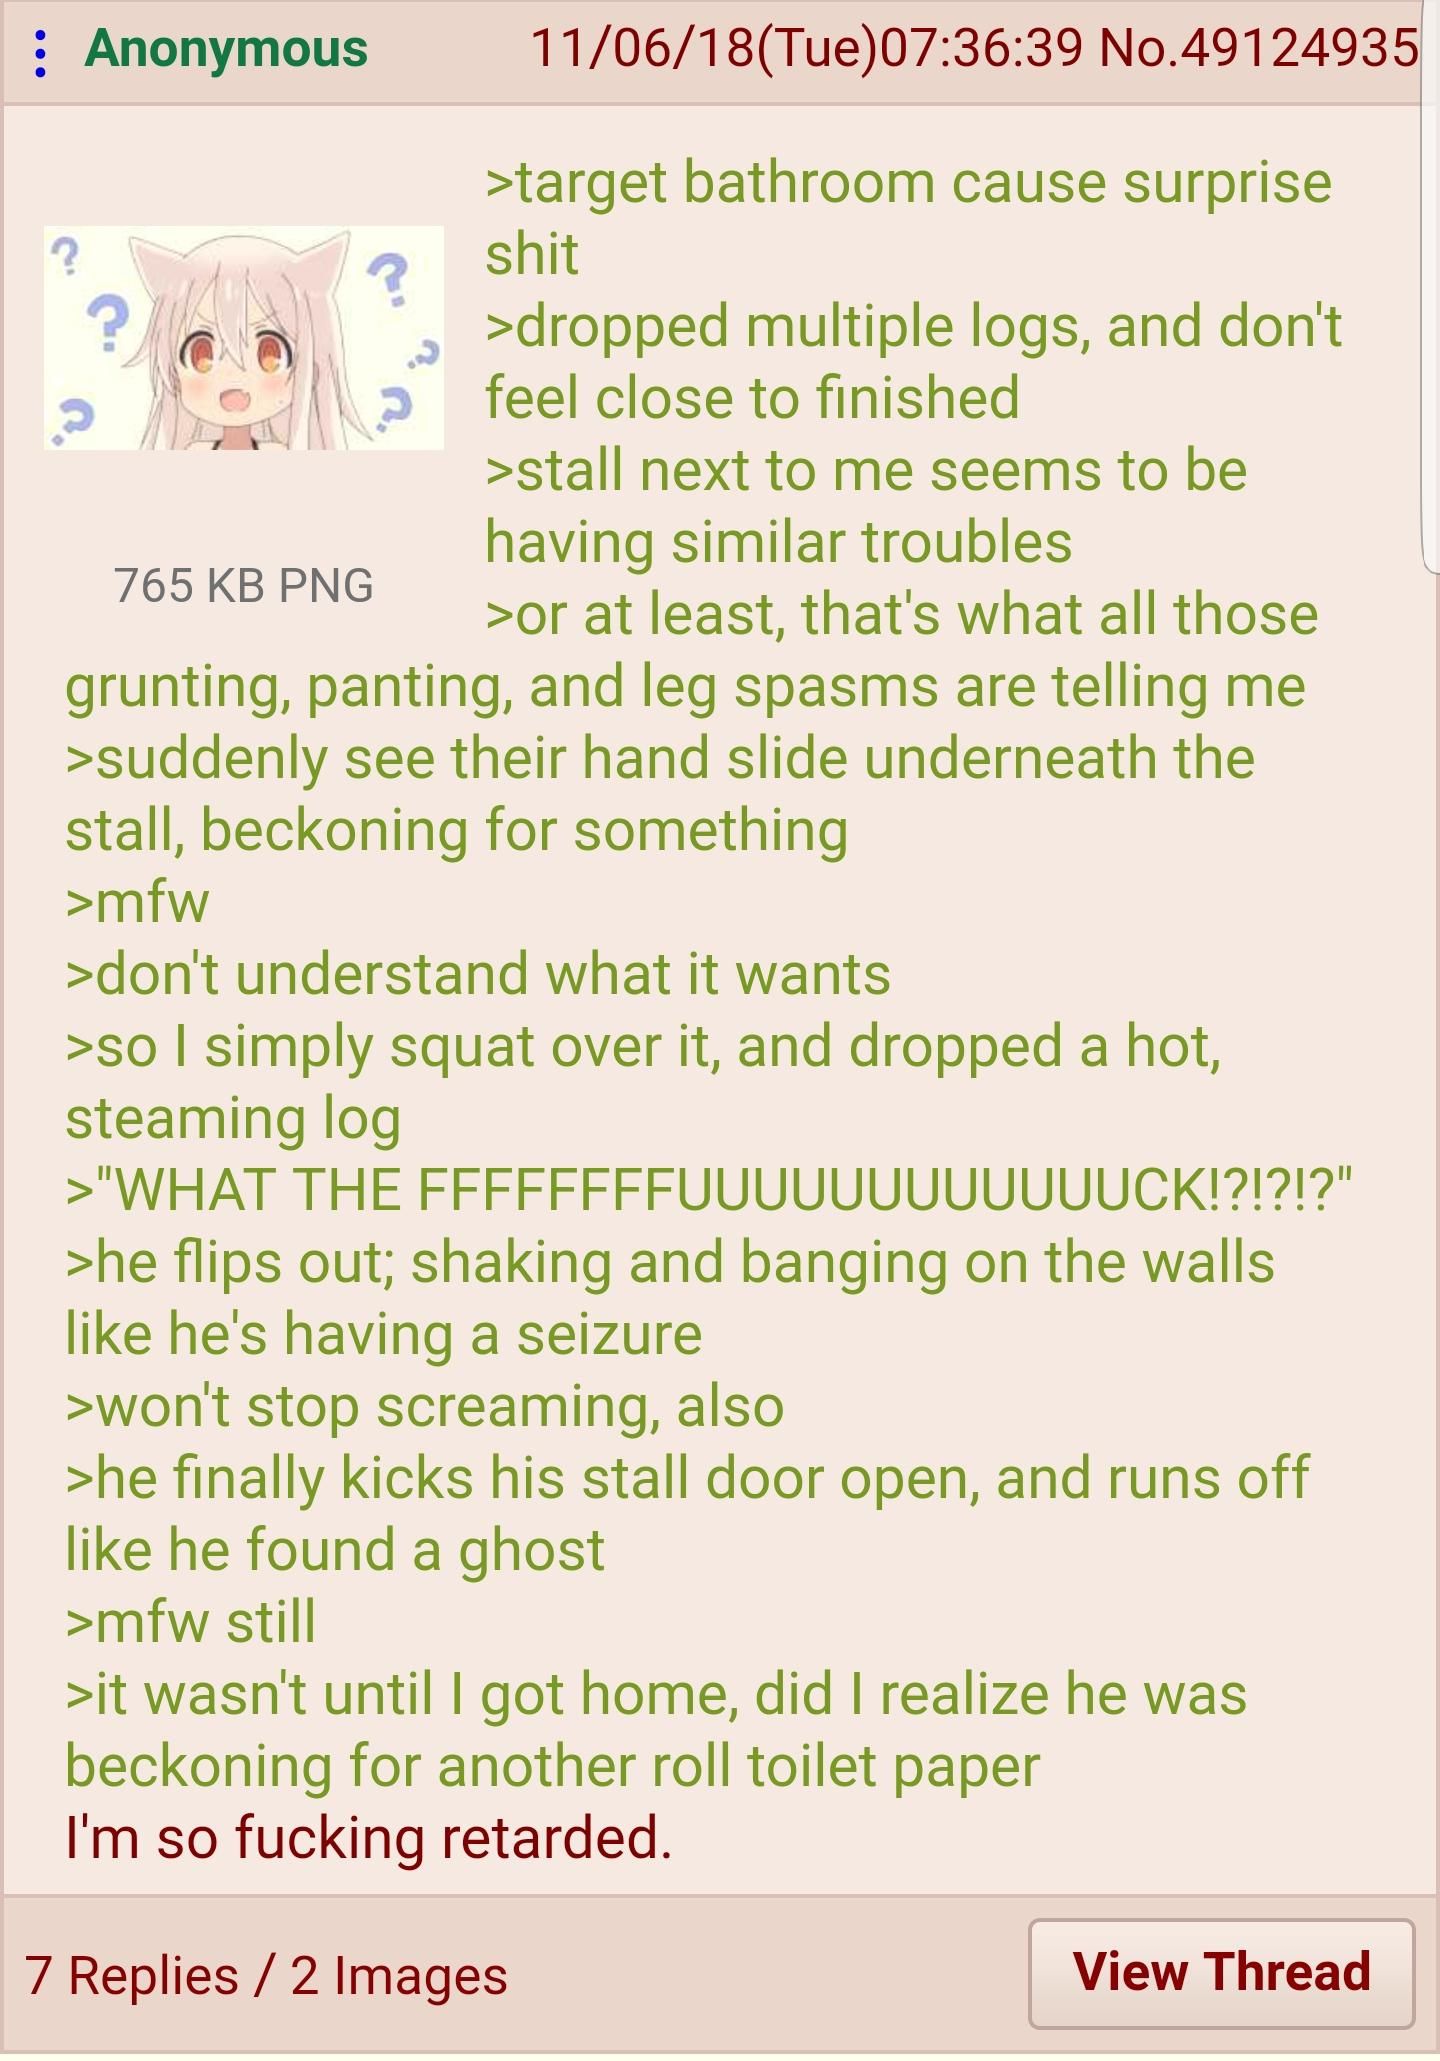 Anon is special, but not the good kind